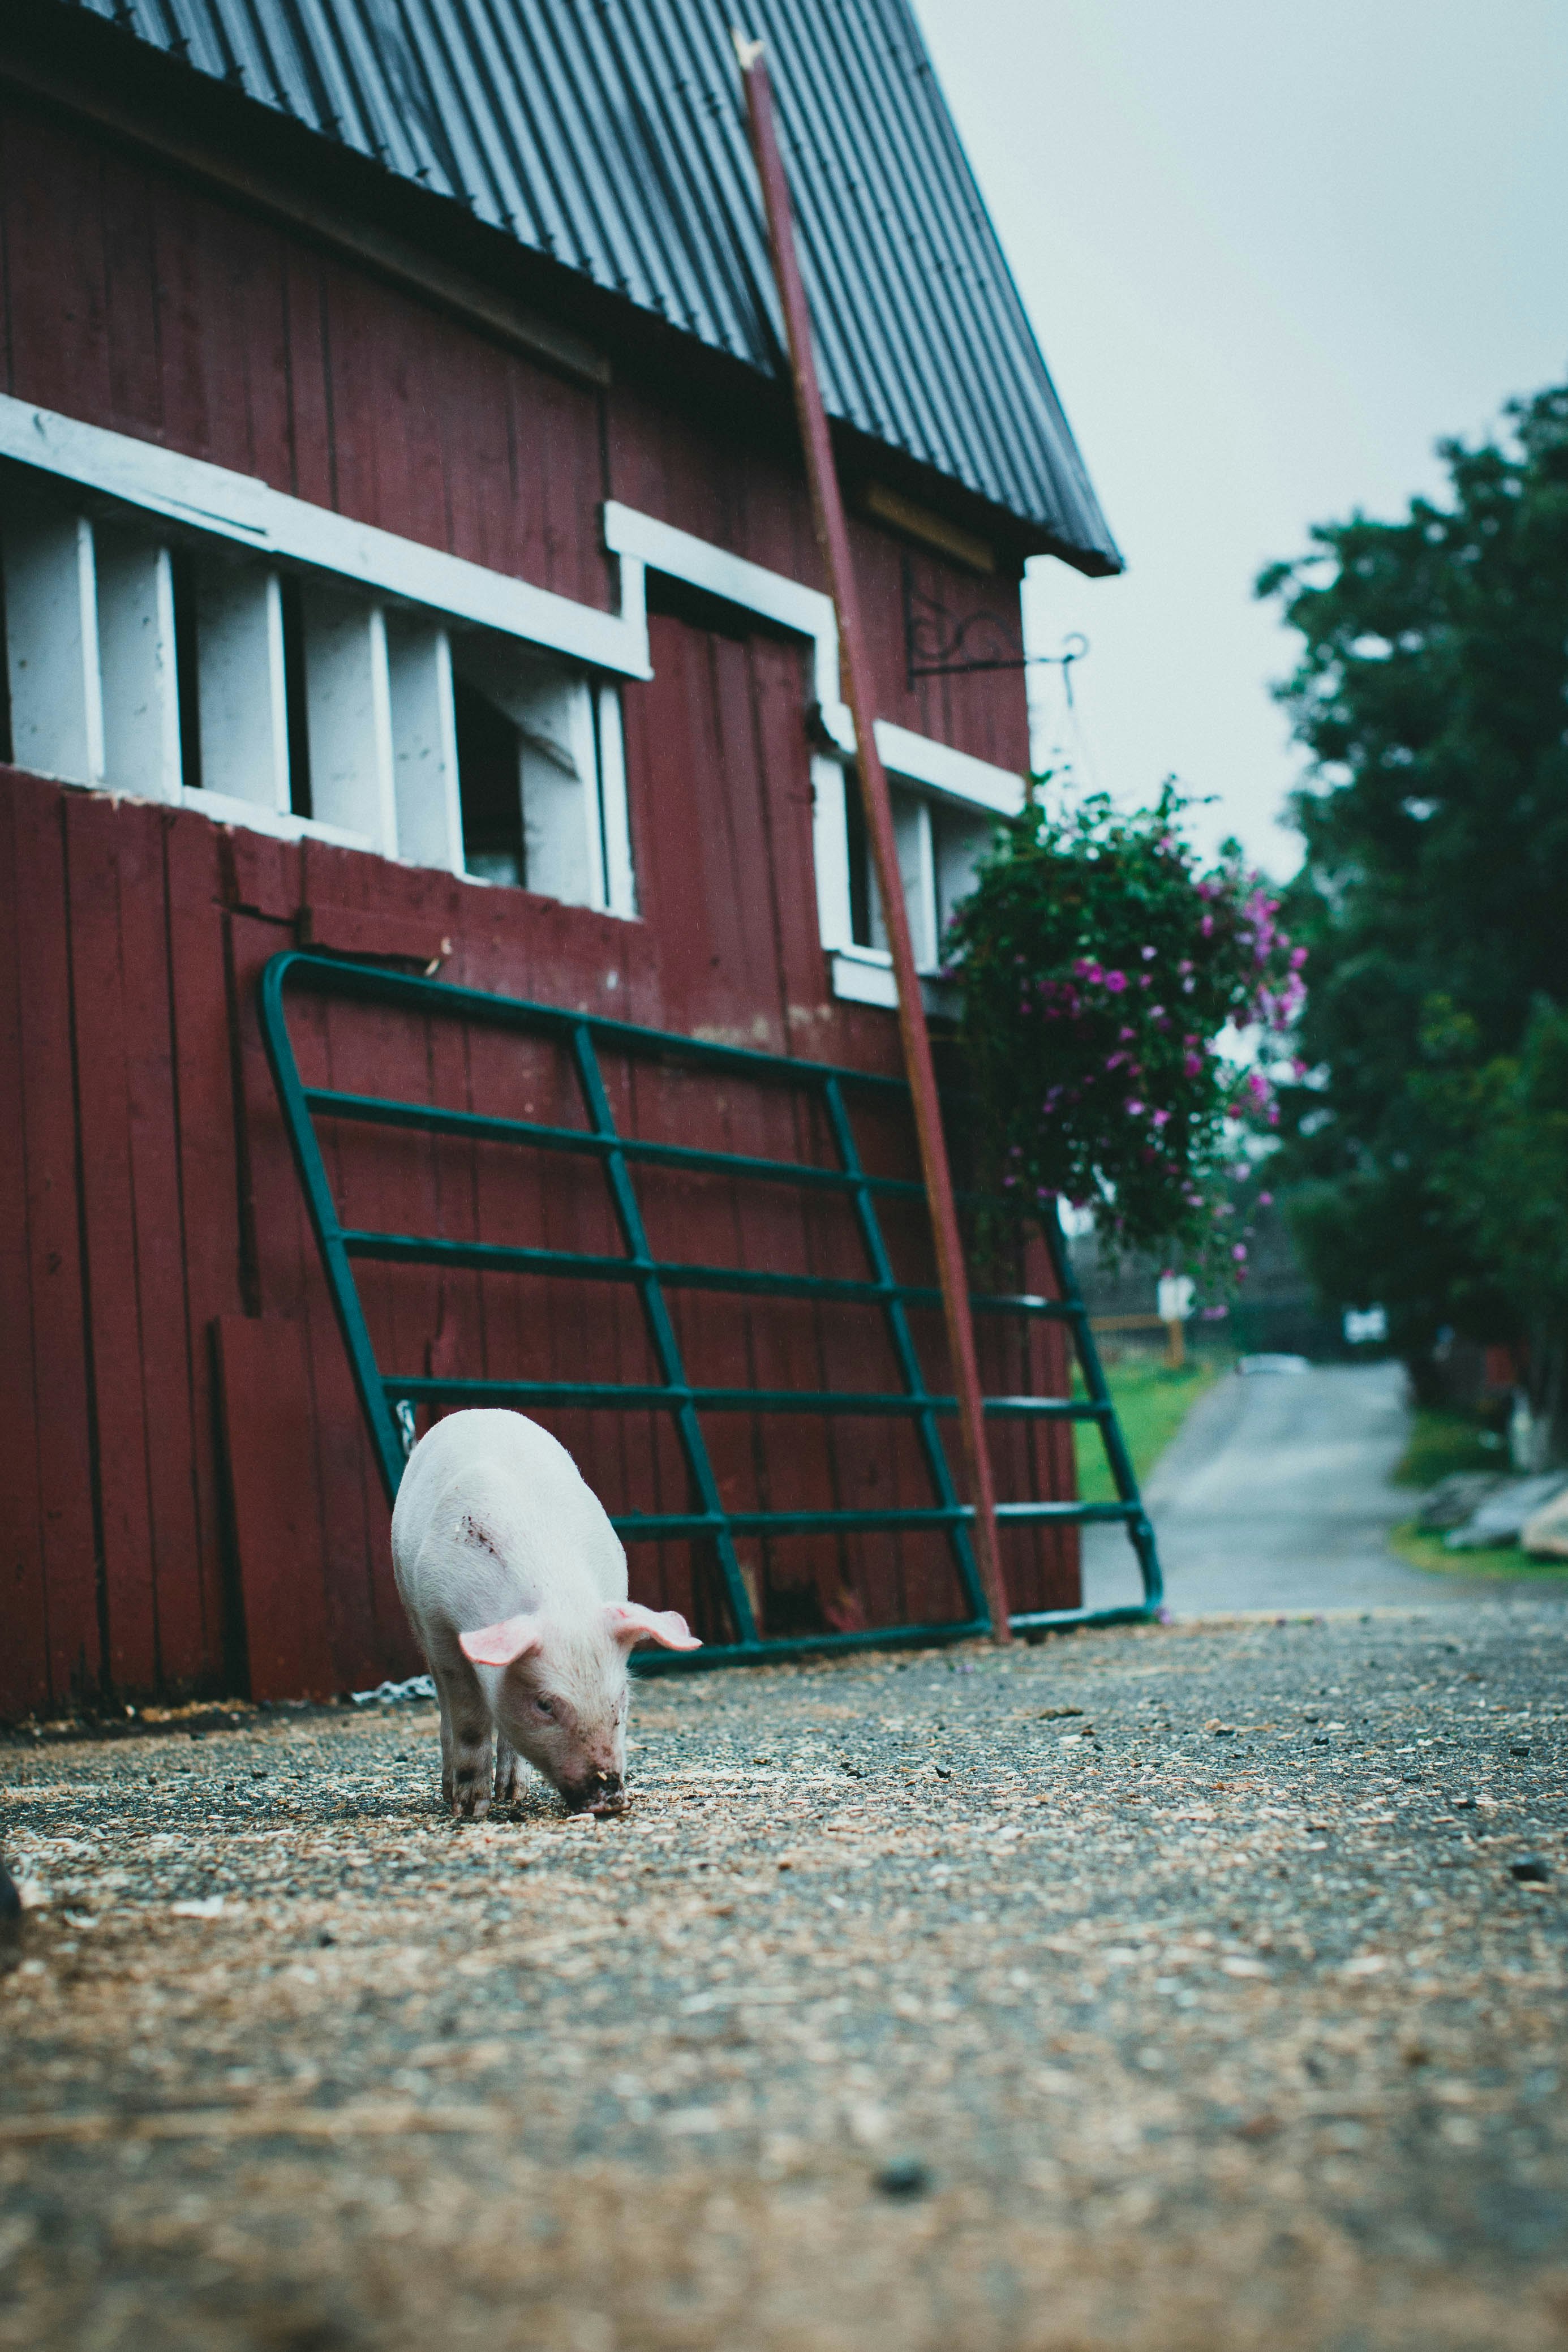 pig near red wooden house during daytime